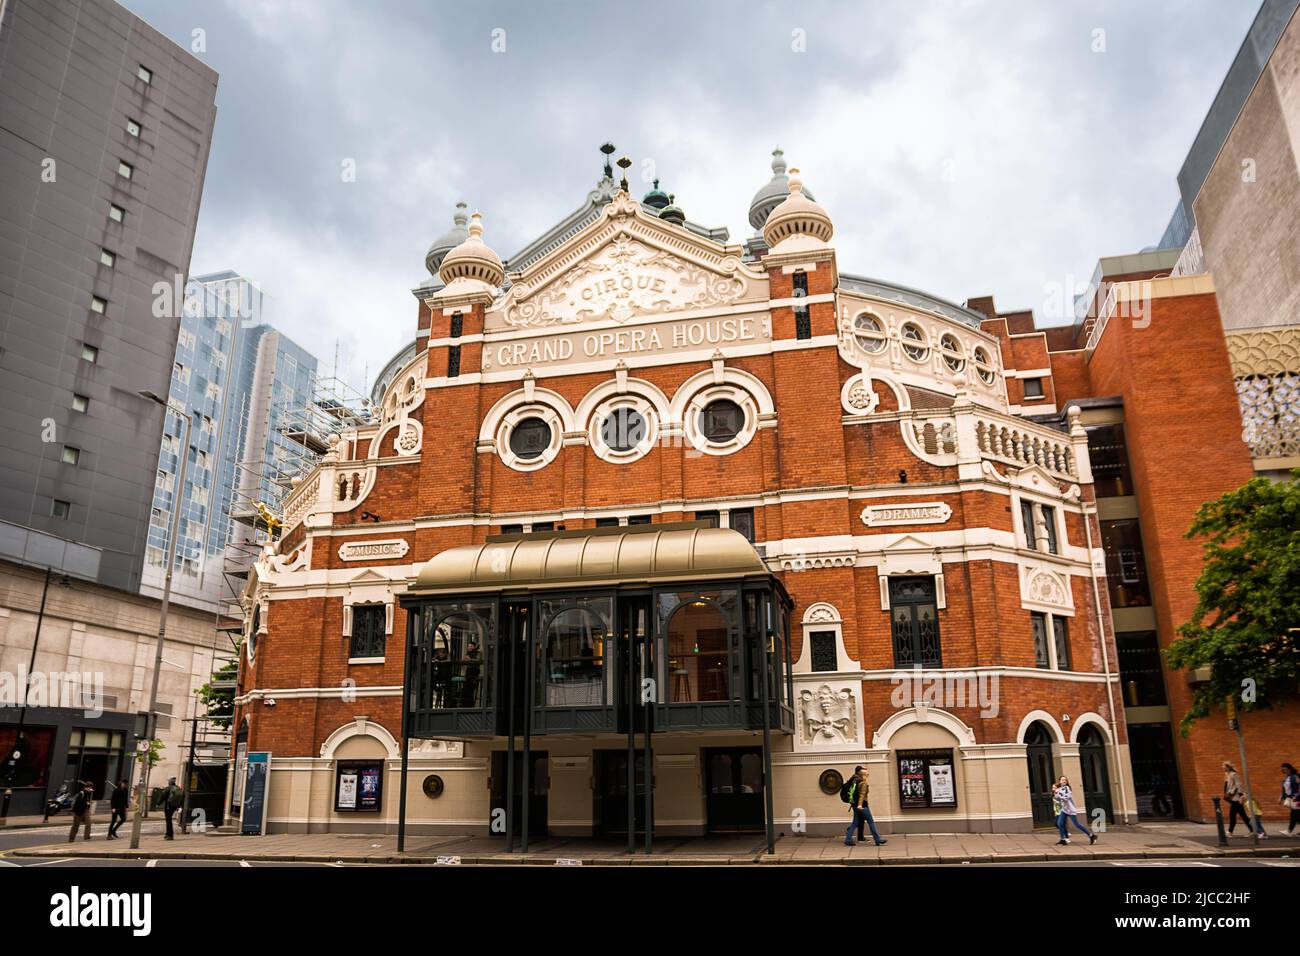 Belfast, United Kingdom - May 21, 2022: Facade of the Grand Opera House theater in Belfast, Northern Ireland. Stock Photo